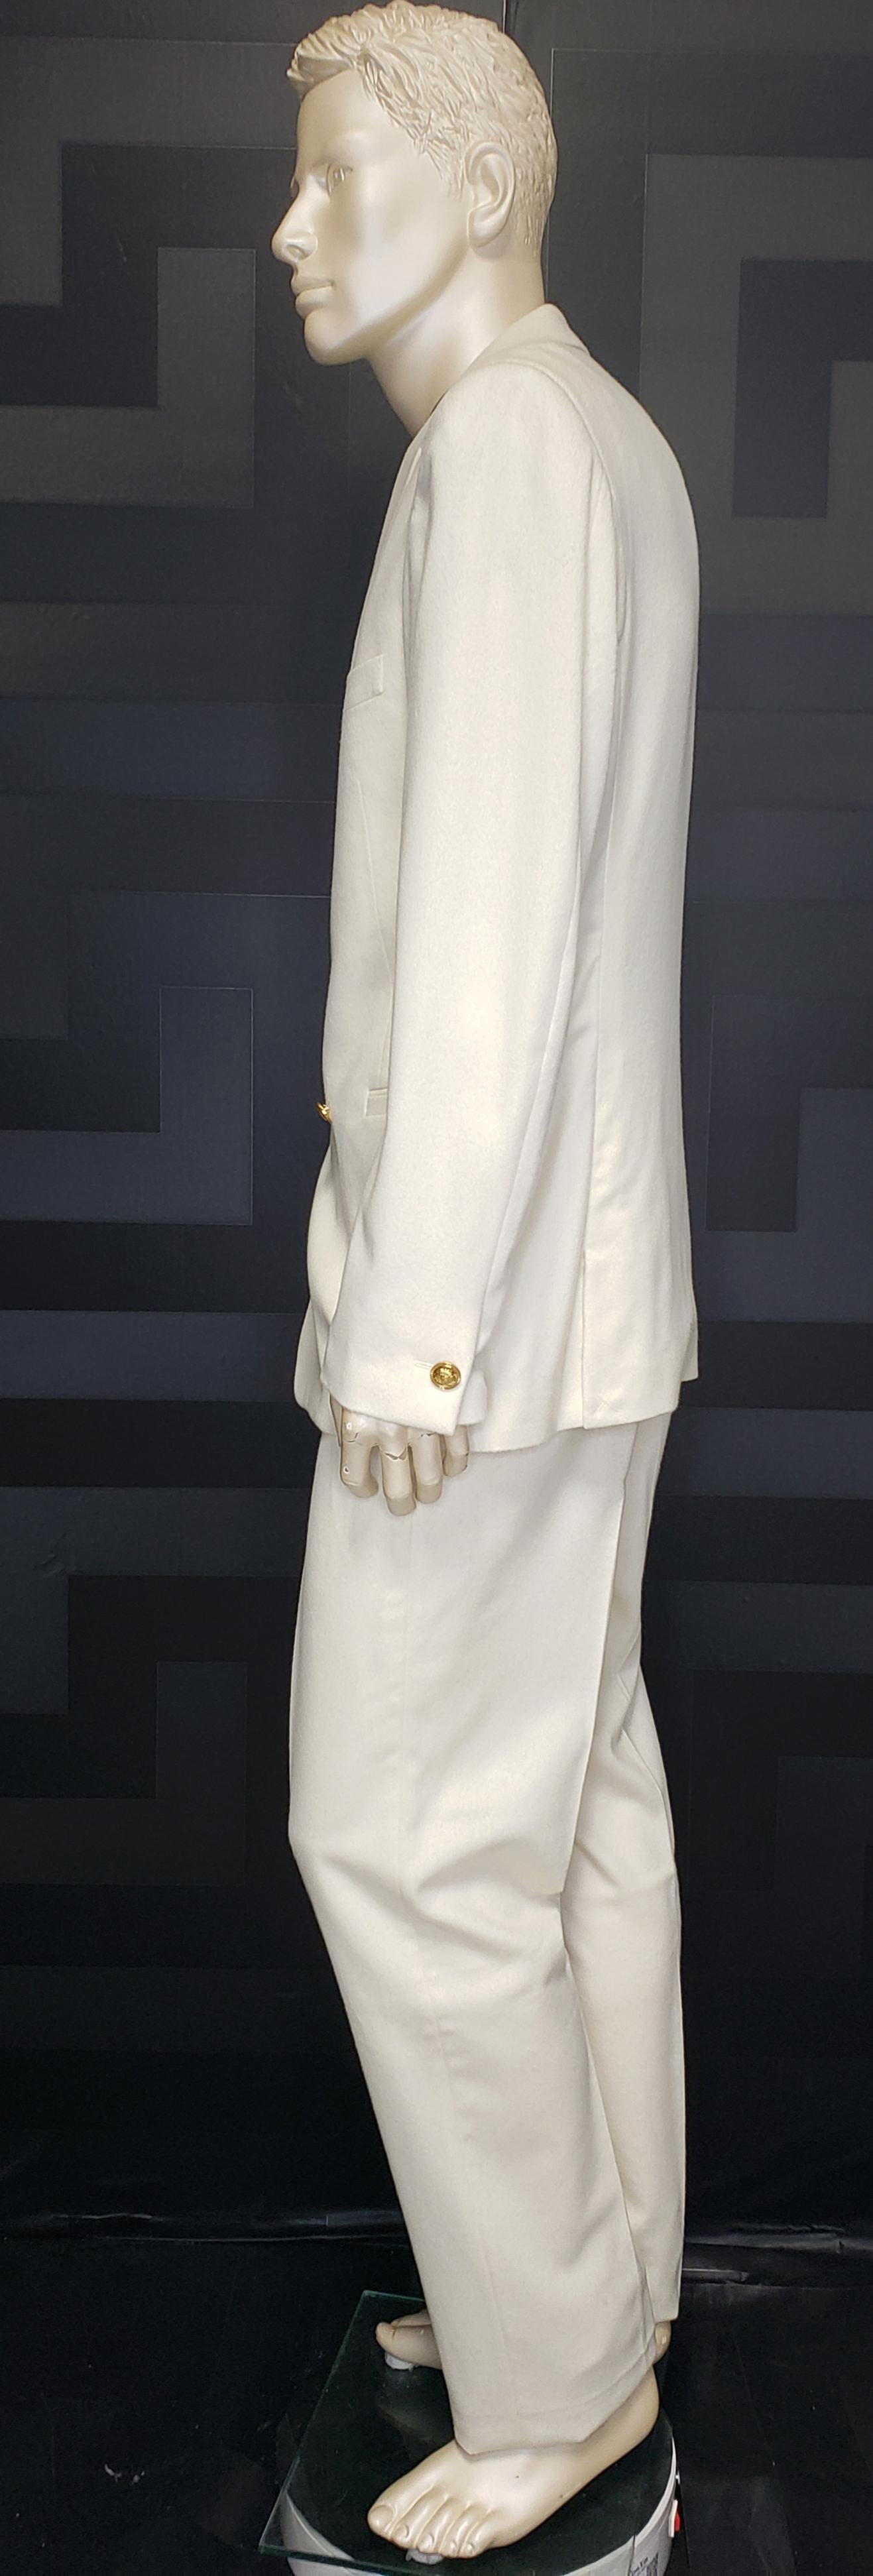 F/W2013 look #51 BRAND NEW VERSACE OFF WHITE 100% CASHMERE SUIT 50 - 40 (L) For Sale 3